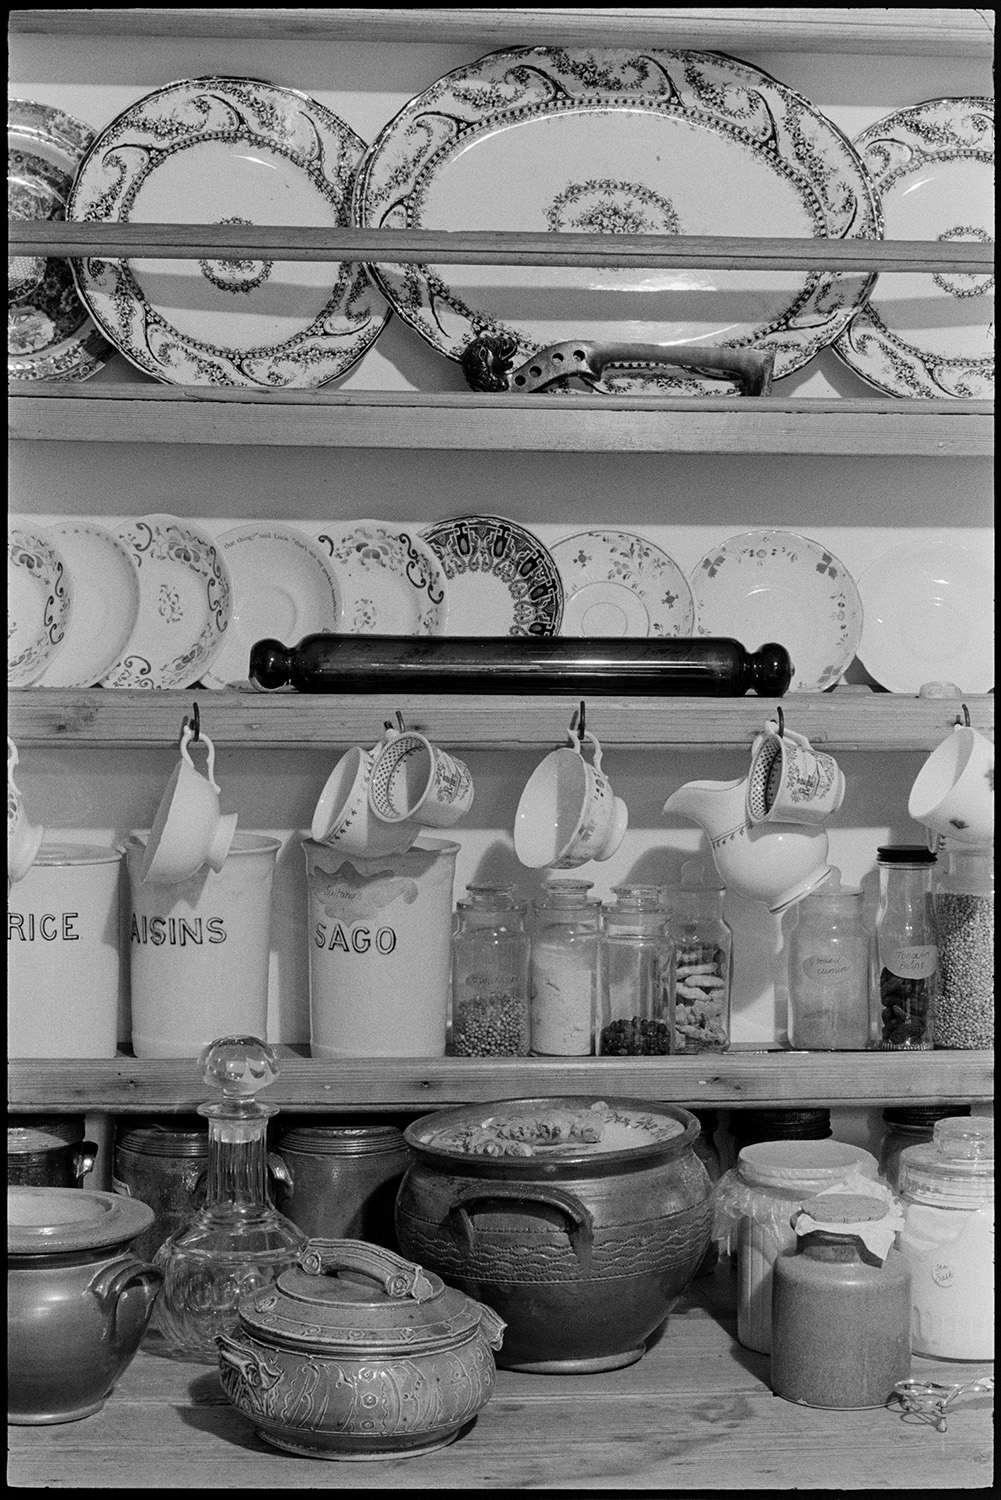 Kitchen utensils, dresser with plates, cups etc.
[Kitchen utensils, plates, storage jars, rolling pin, and cups on hooks displayed on a dresser in Truda Lane's kitchen at Kiverleigh, near Beaford. The image was taken for a cookery book.]